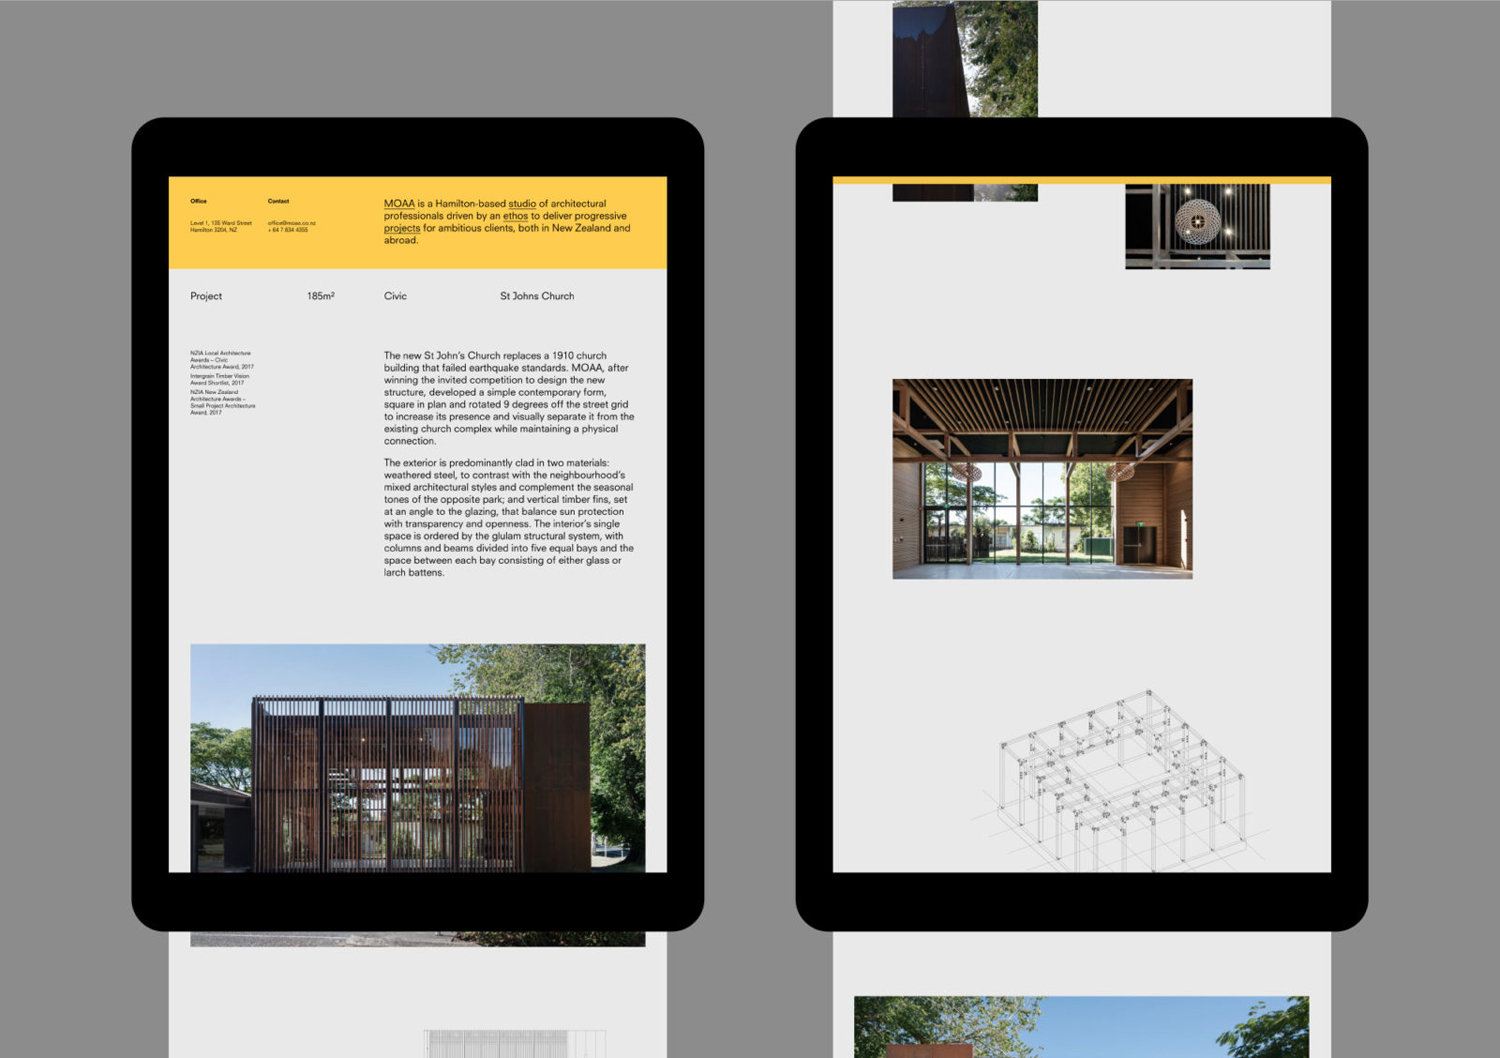 Graphic identity and website designed by In-house for New Zealand's MOAA Architects